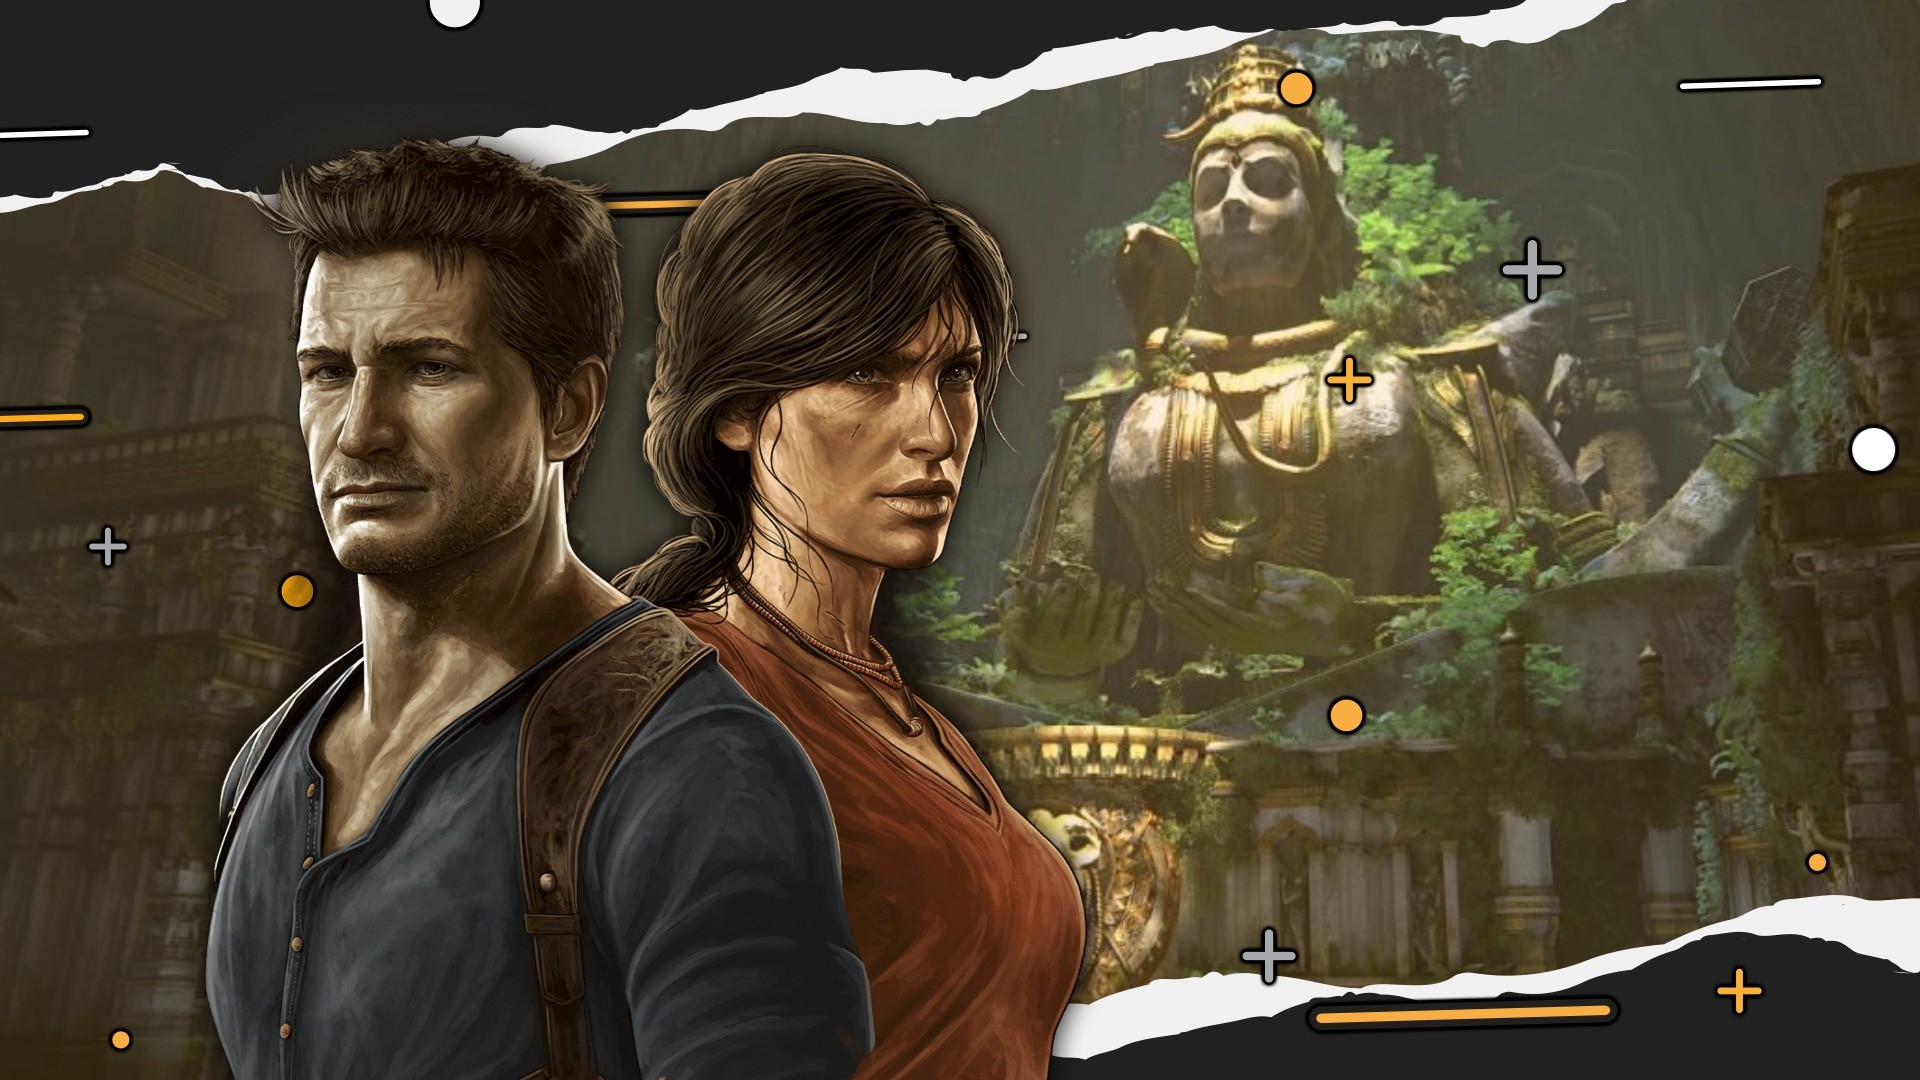 Uncharted thieves collection прохождение. Анчартед Legacy of Thieves. Uncharted: Legacy of Thieves collection. Uncharted 4 Legacy of Thieves collection. Uncharted наследие воров.